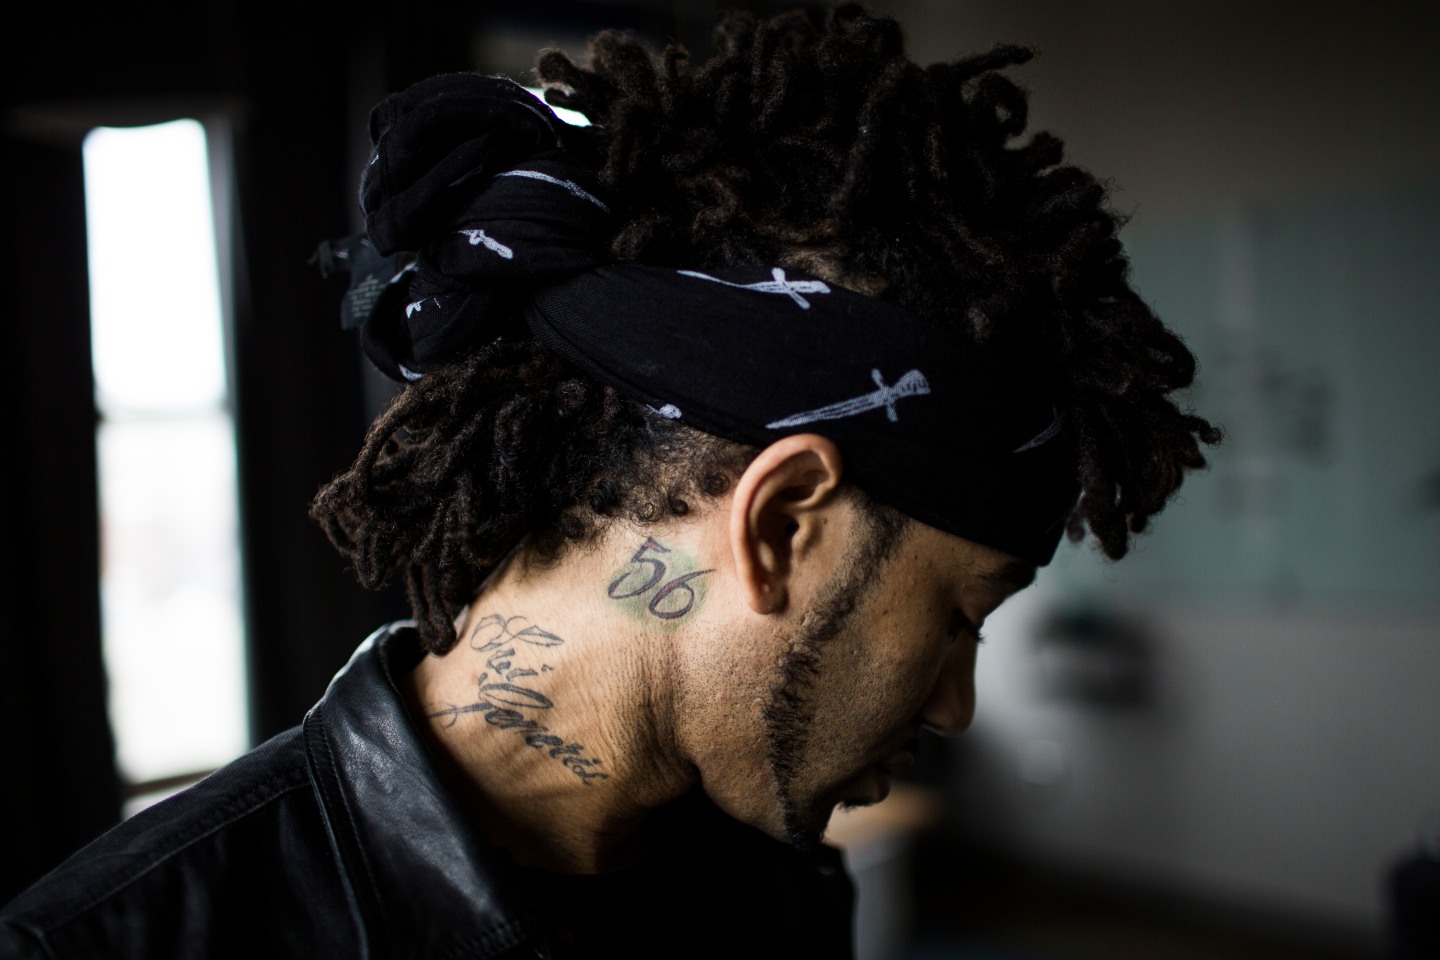 How 56 Nights In A Dubai Jail Changed DJ Esco’s Life Forever